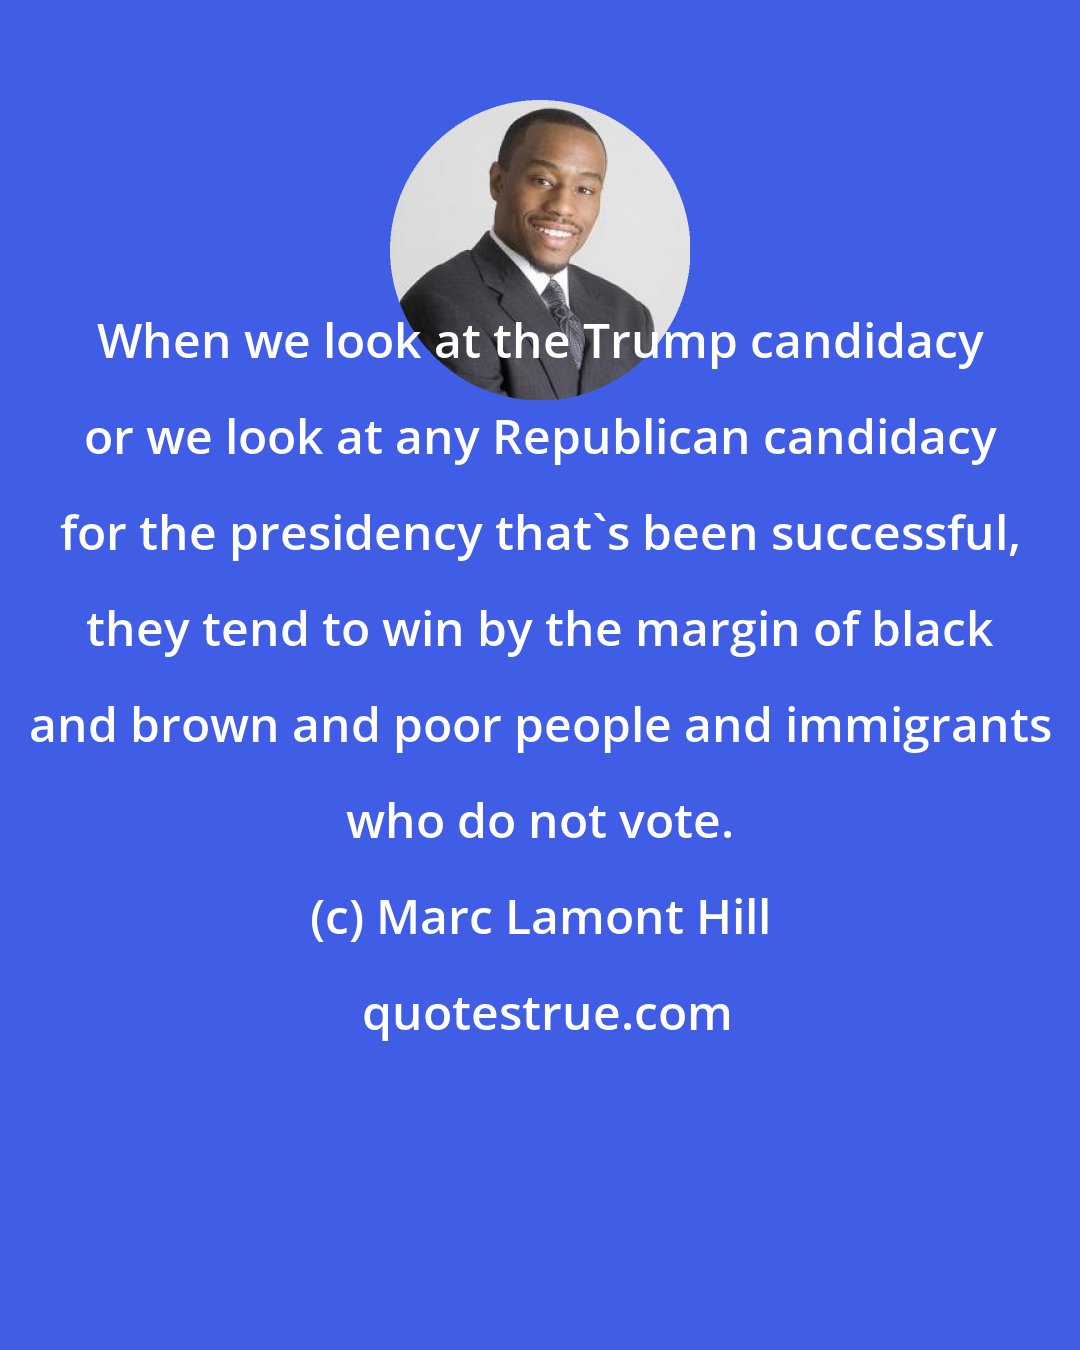 Marc Lamont Hill: When we look at the Trump candidacy or we look at any Republican candidacy for the presidency that's been successful, they tend to win by the margin of black and brown and poor people and immigrants who do not vote.